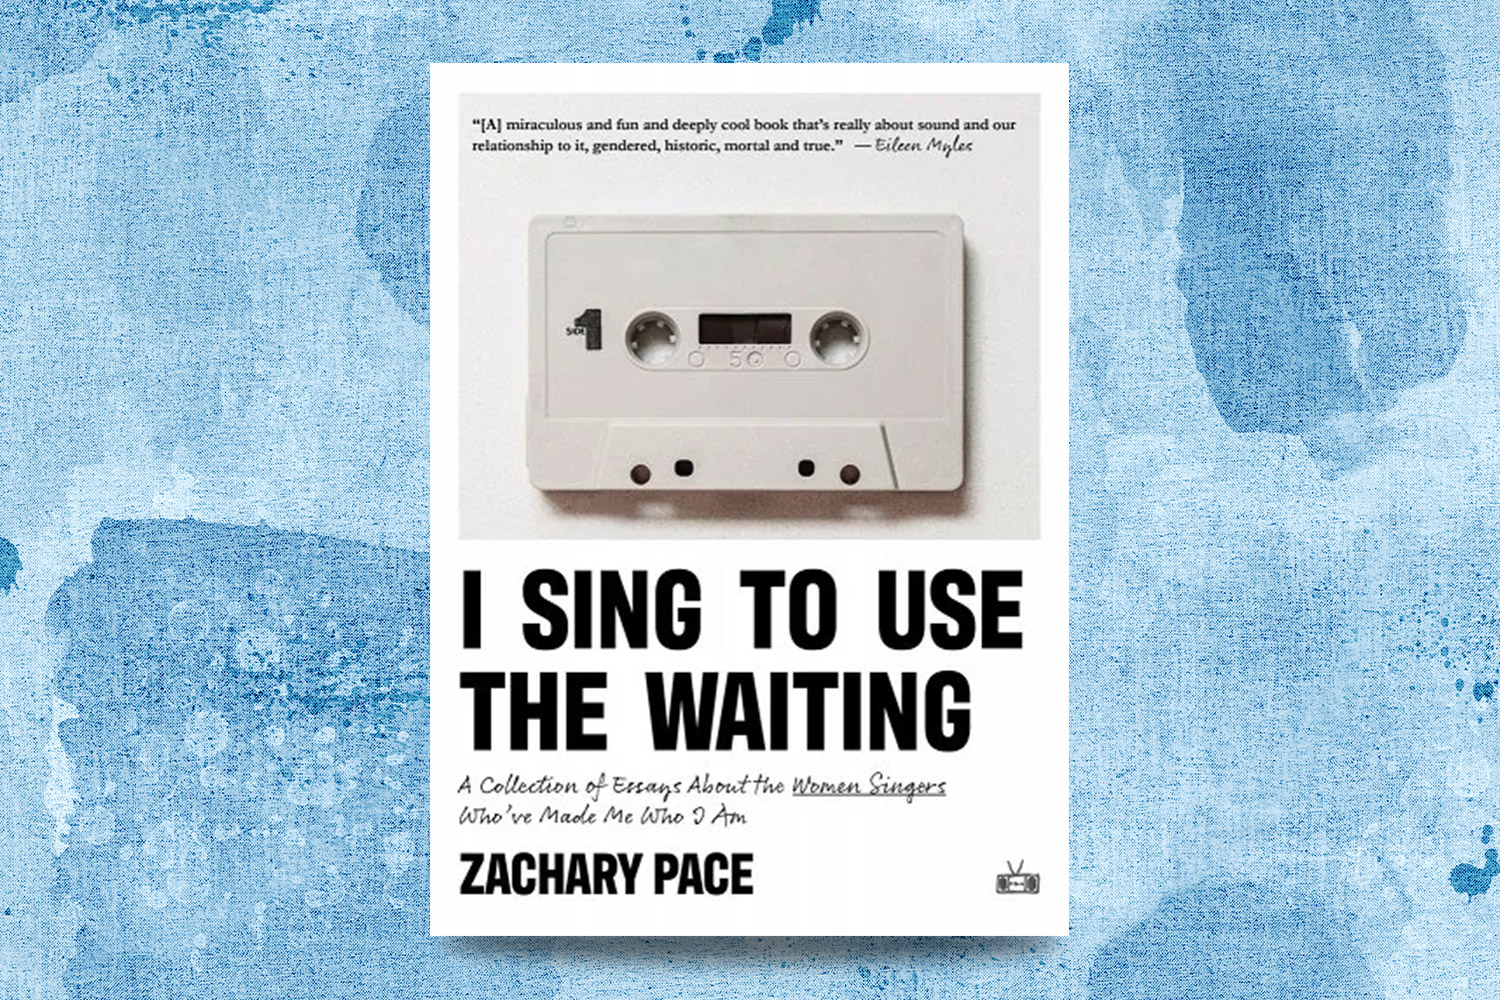 Zachary Pace, I Sing to Use the Waiting: A Collection of Essays about the Women Singers Who've Made Me Who I Am